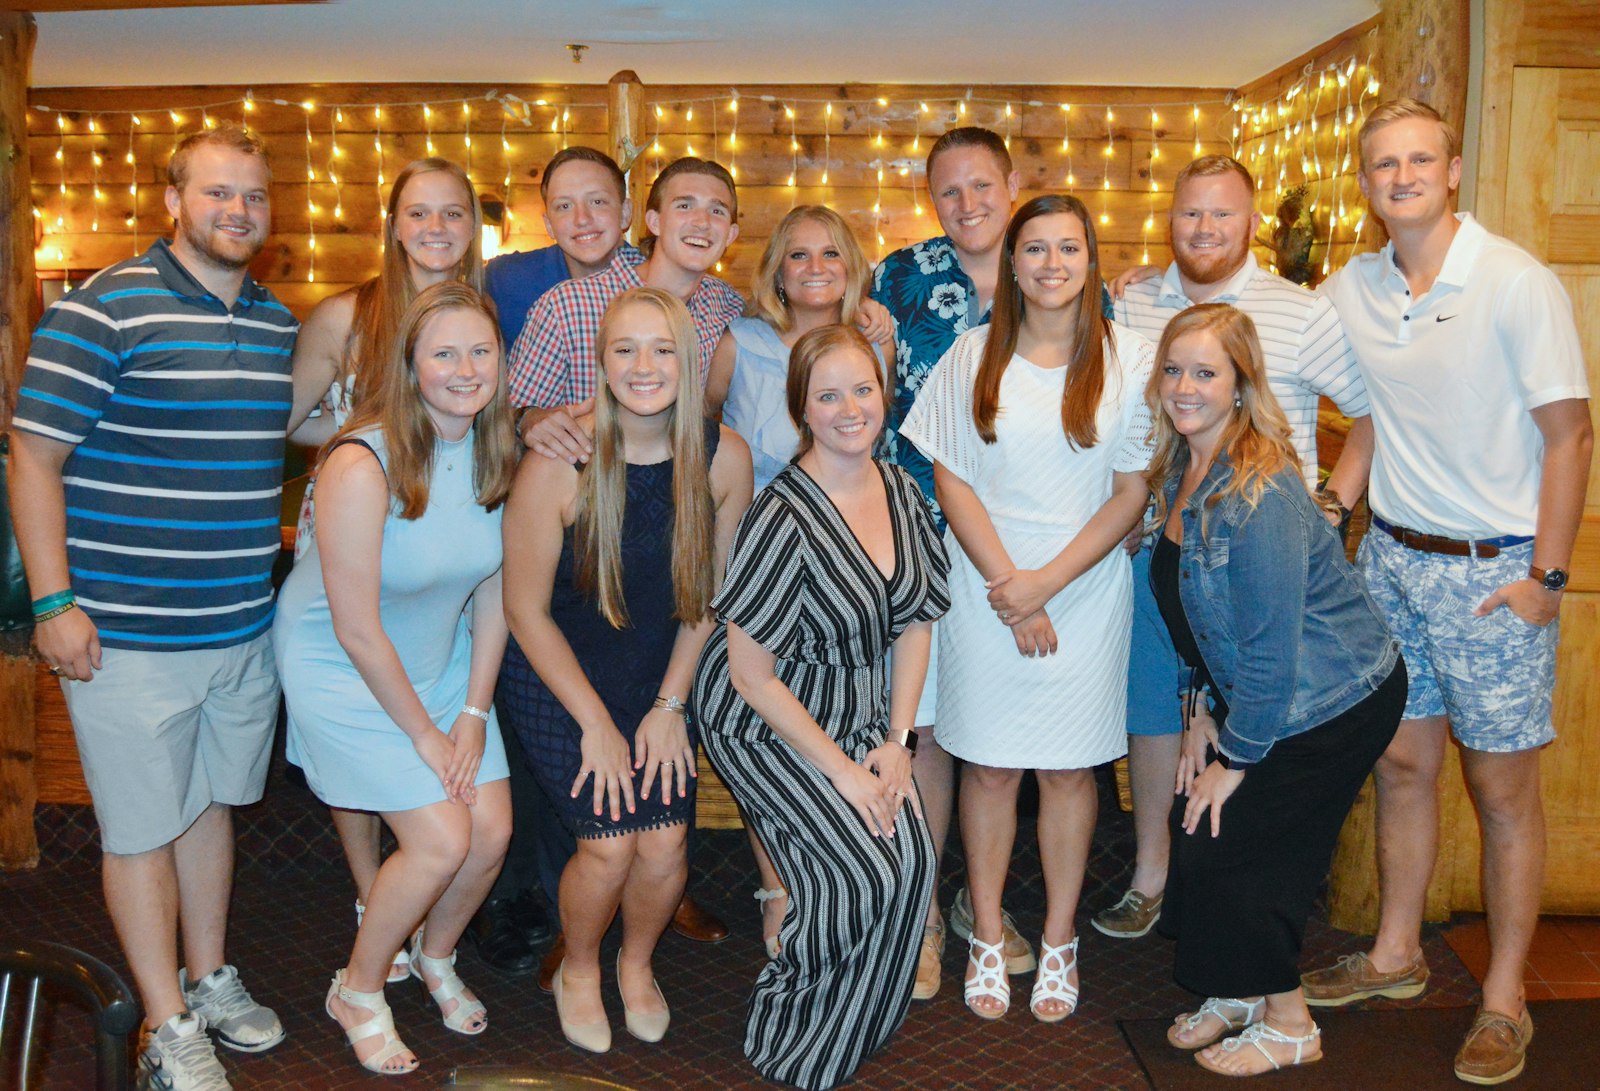 Thirteen members of the Wardowski family, all of whom are Bishop Foley Catholic graduates, gather together for one of their many family celebrations.